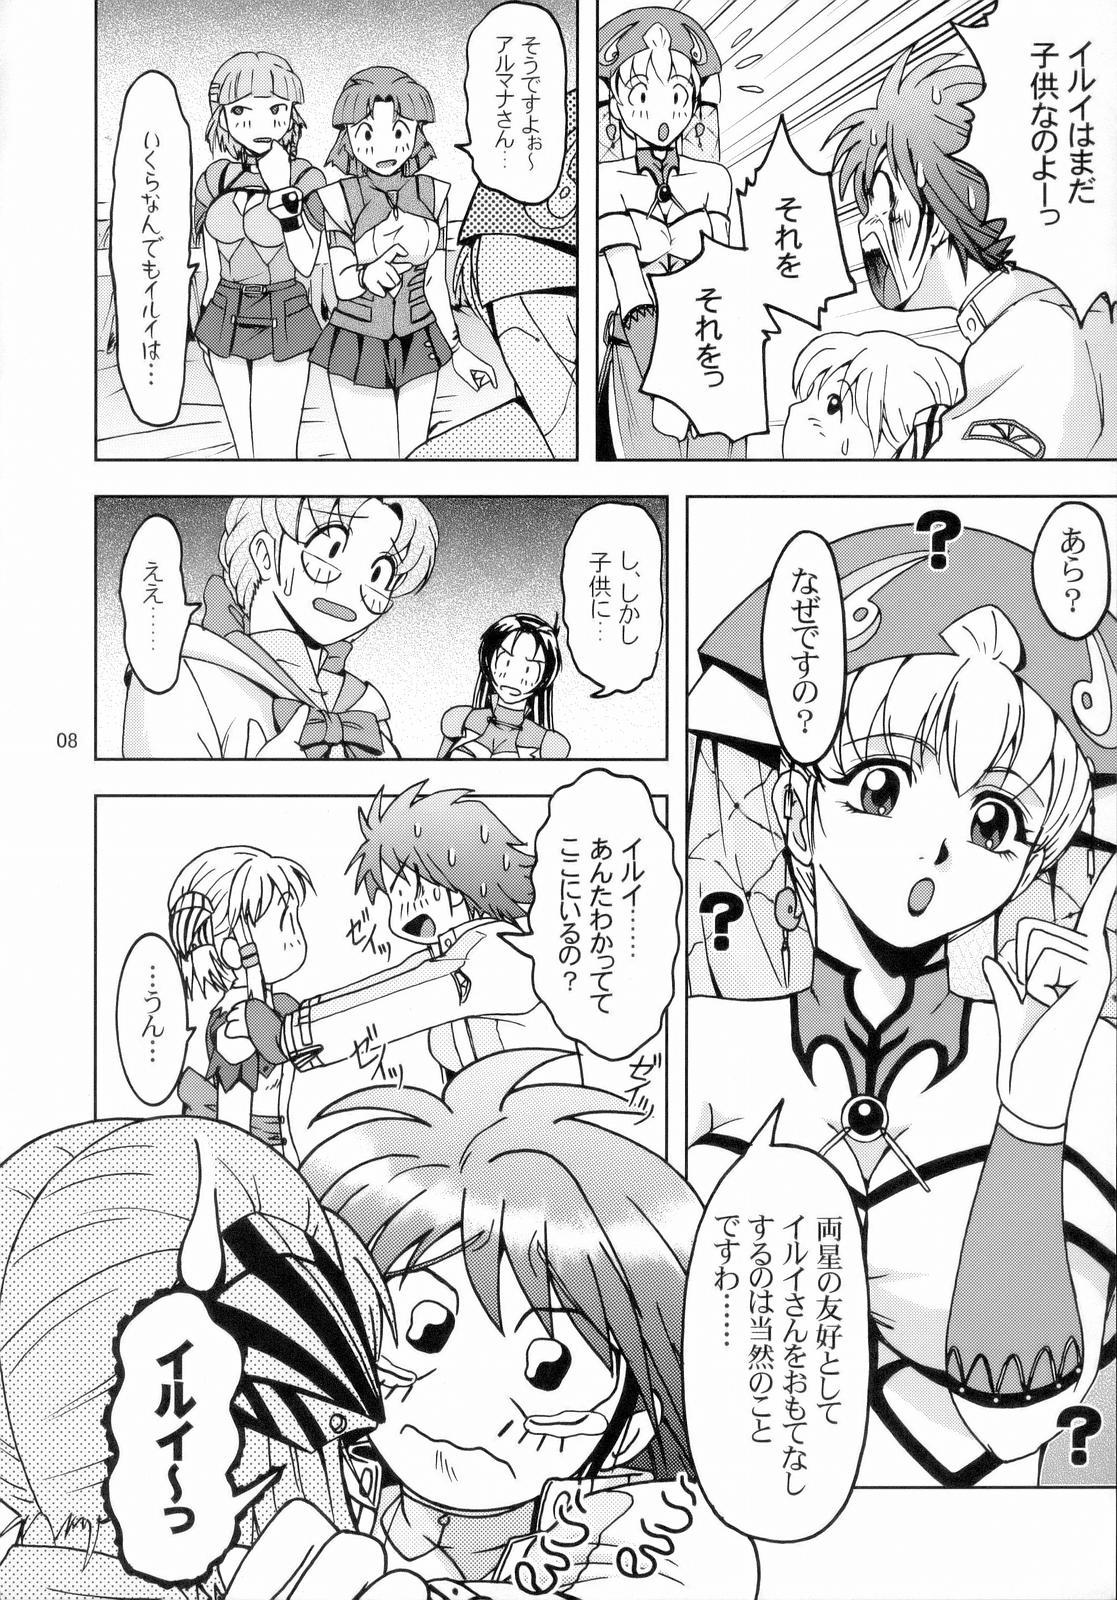 Real Amateur Himitsu no Special Stage NEXT - Super robot wars Topless - Page 7